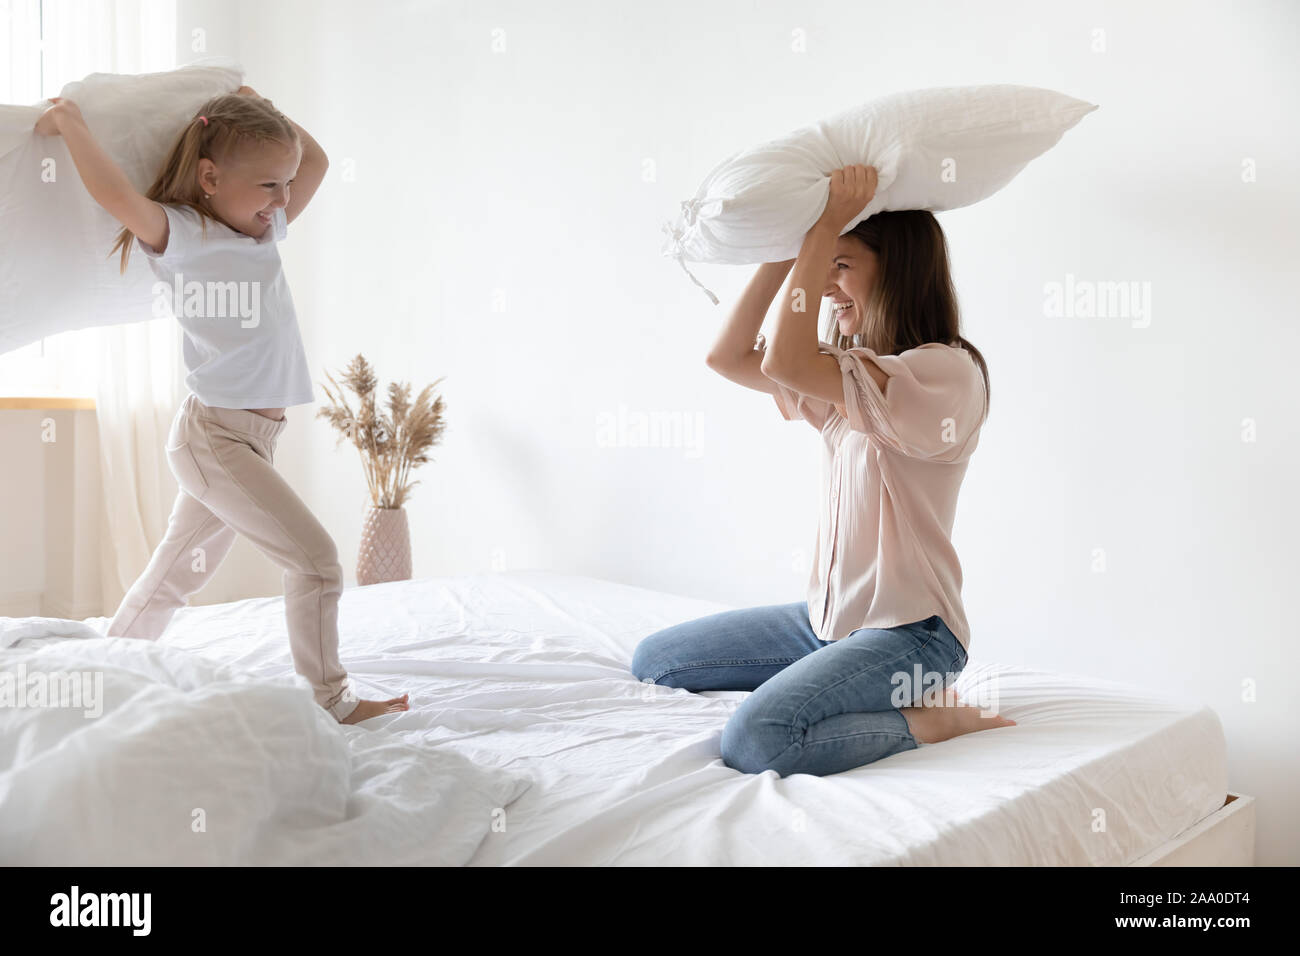 Overjoyed little preschool child girl playing fight with mother. Stock Photo